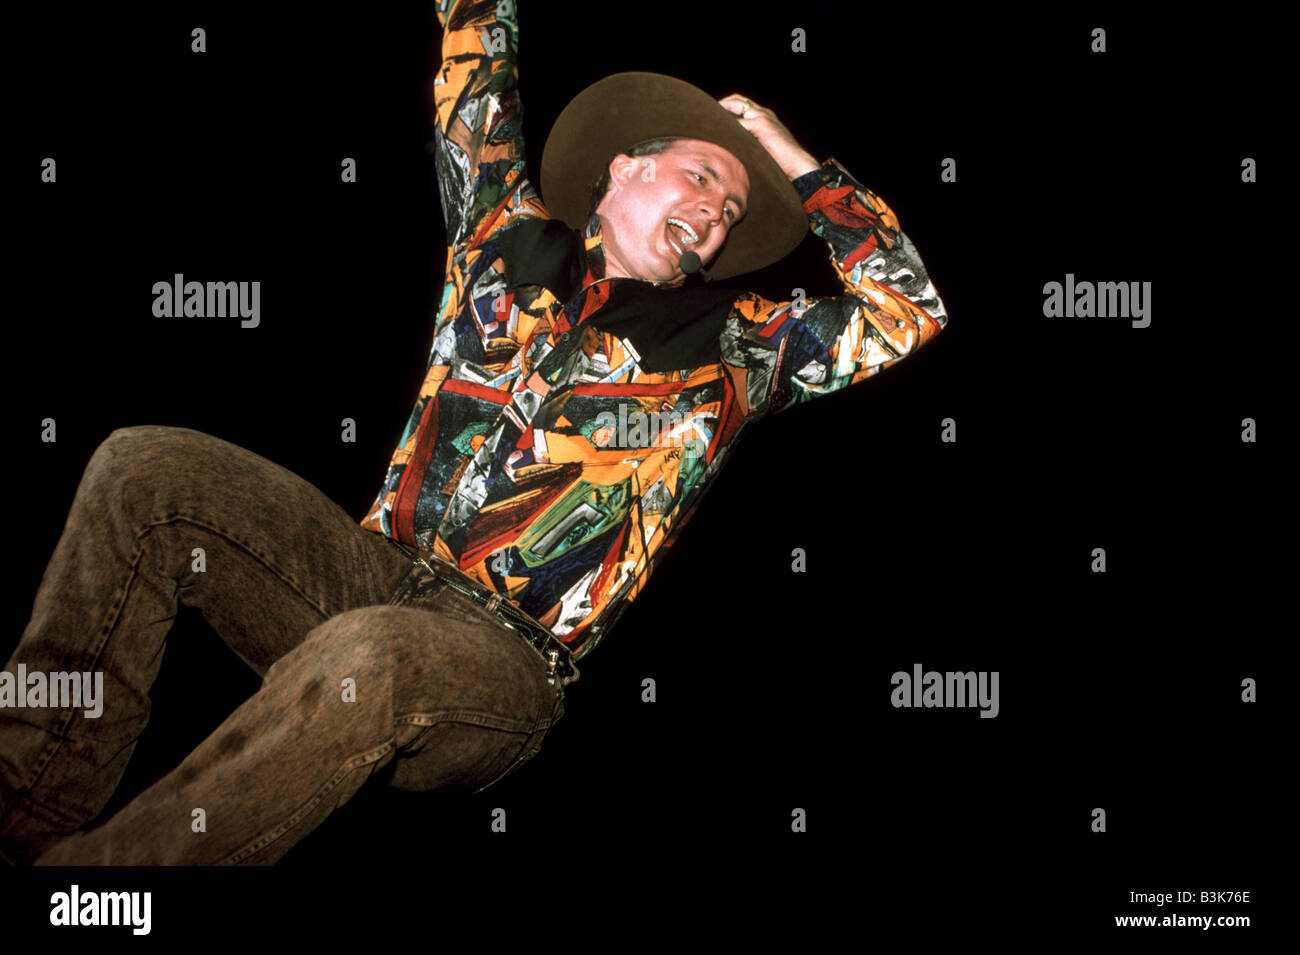 GARTH BROOKS  US  Country and Western musician Stock Photo